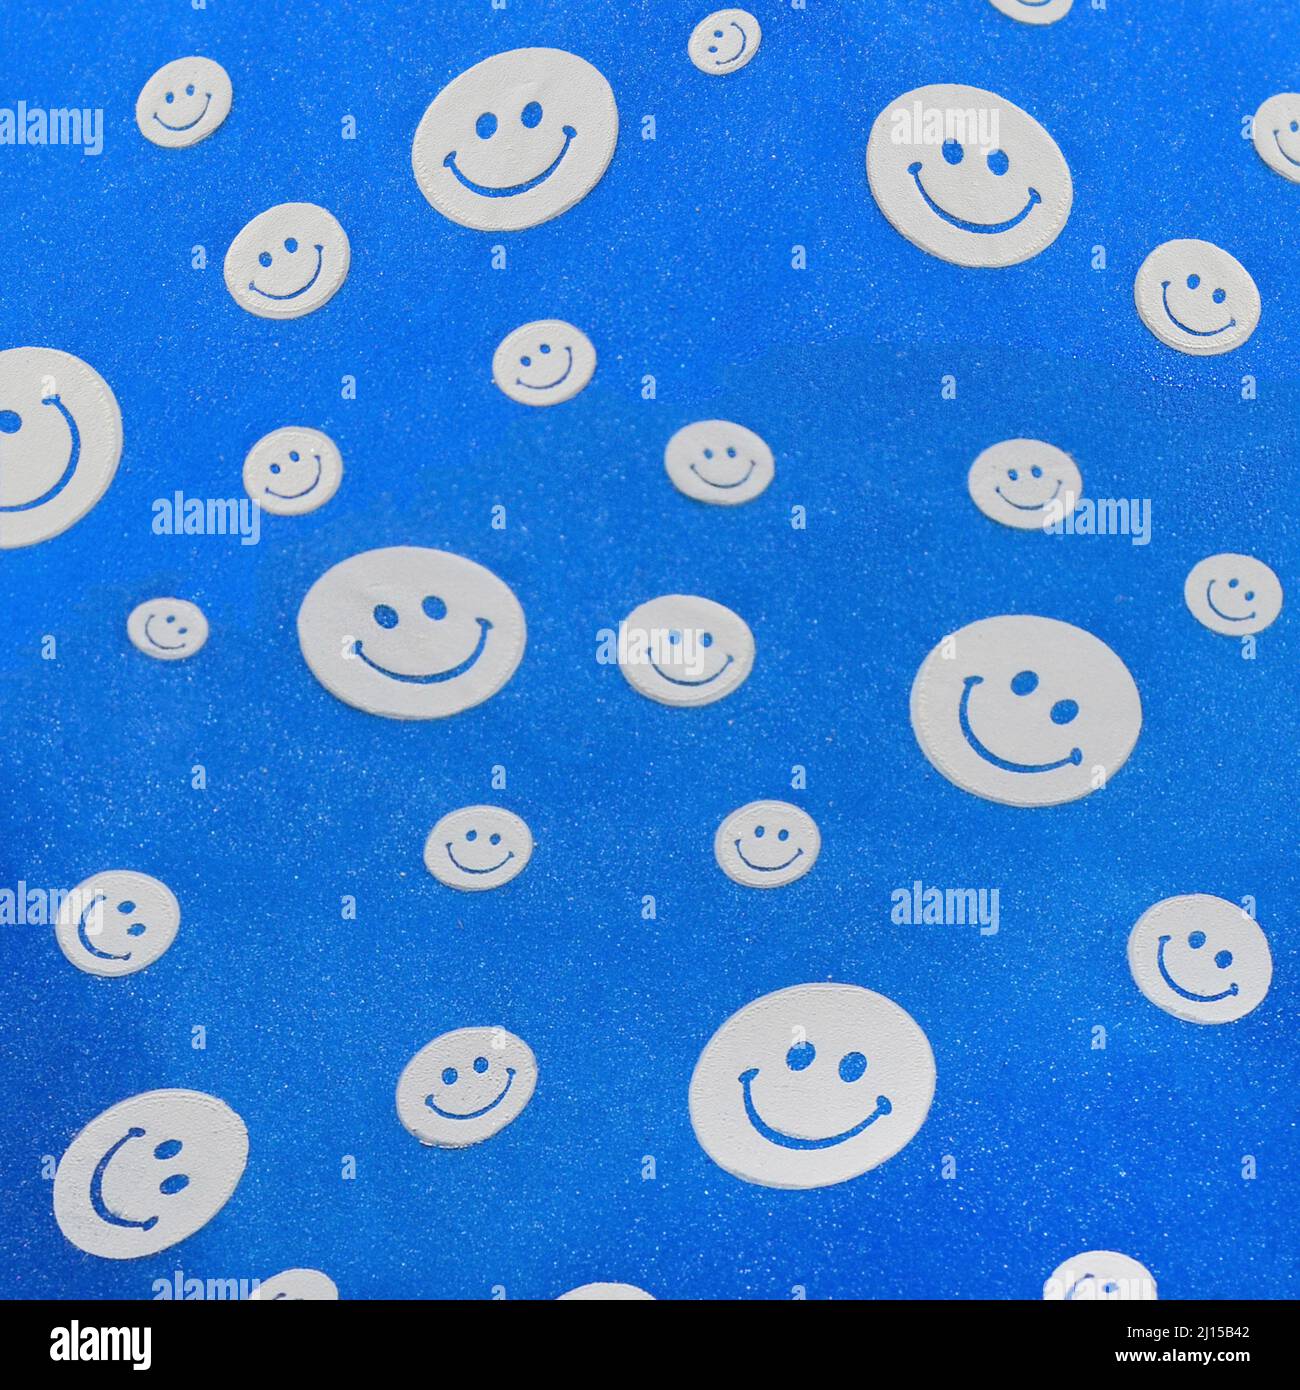 Photo background with happy smileys colorful. Smiling emoticons on blue background Stock Photo